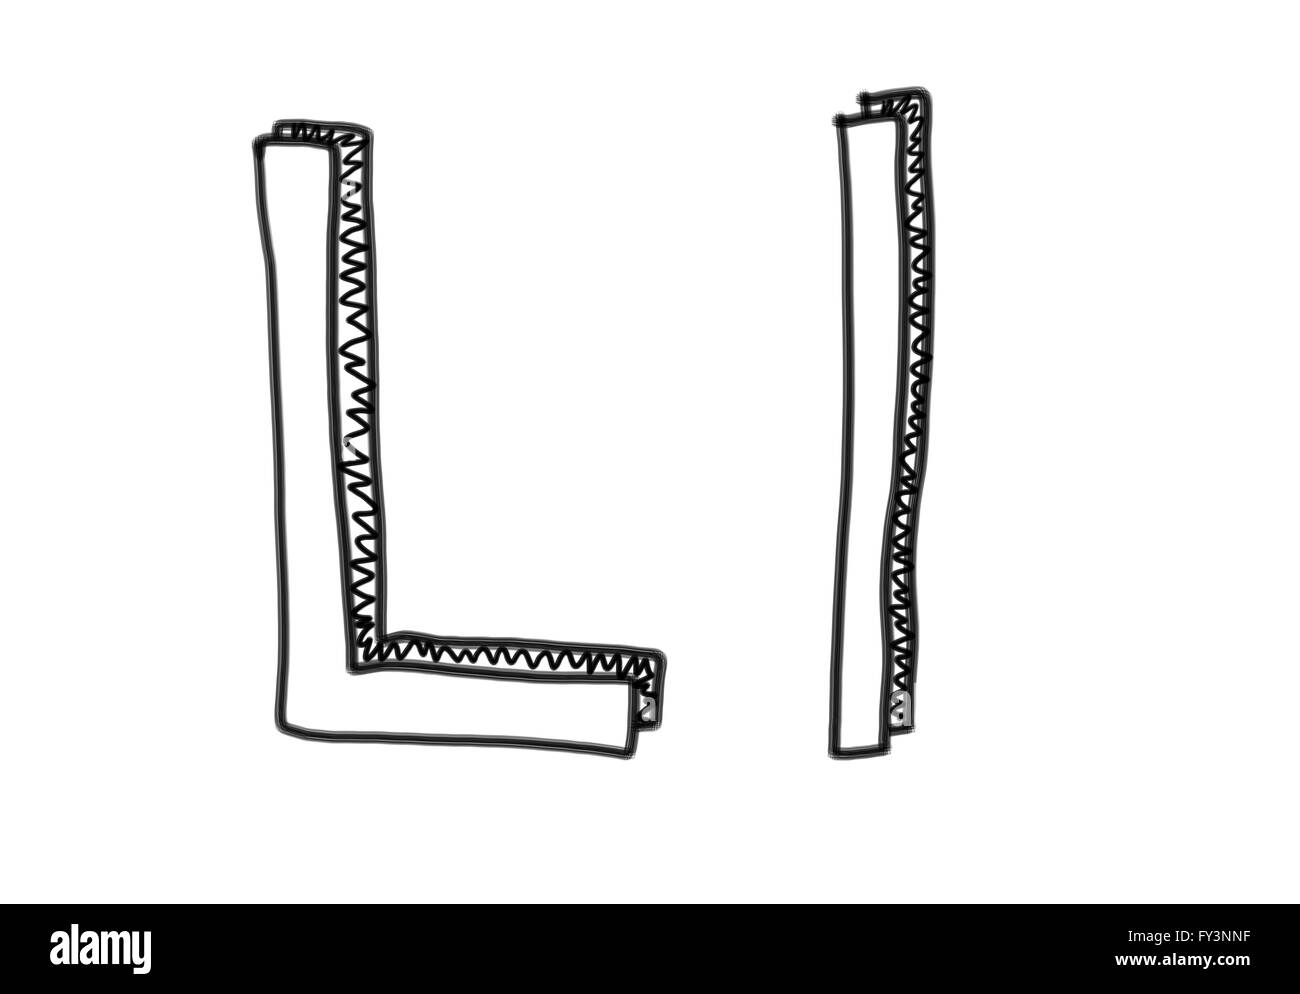 New drawing Character L of alphabet logo icon in design elements. Stock Photo